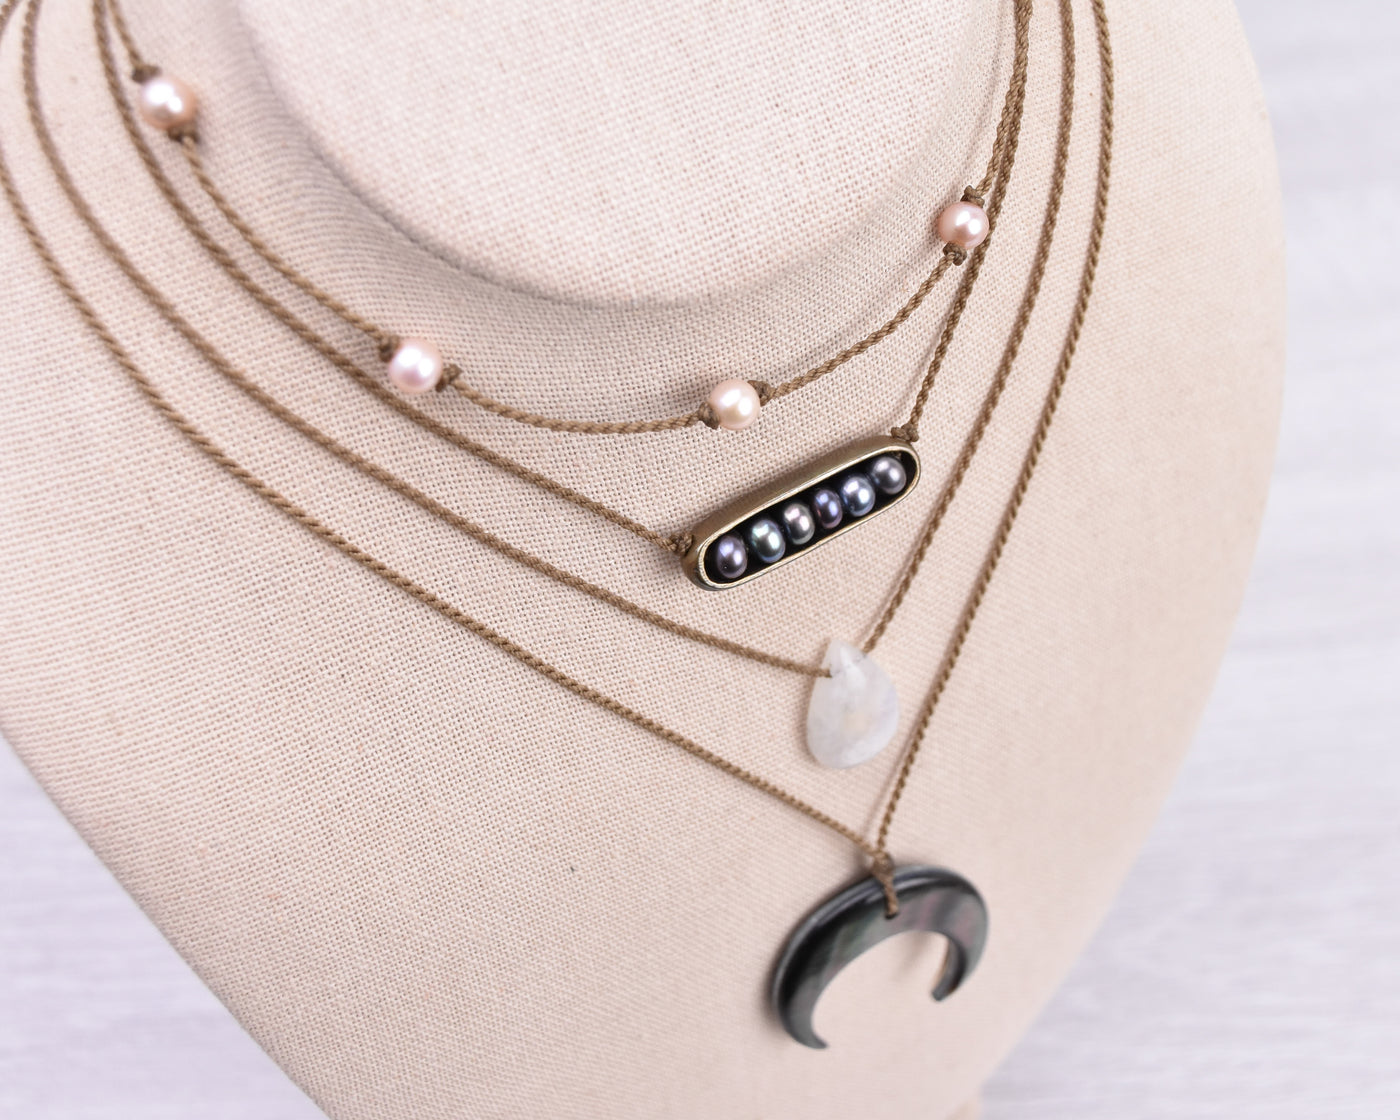 Moon Dust - Necklace Stack